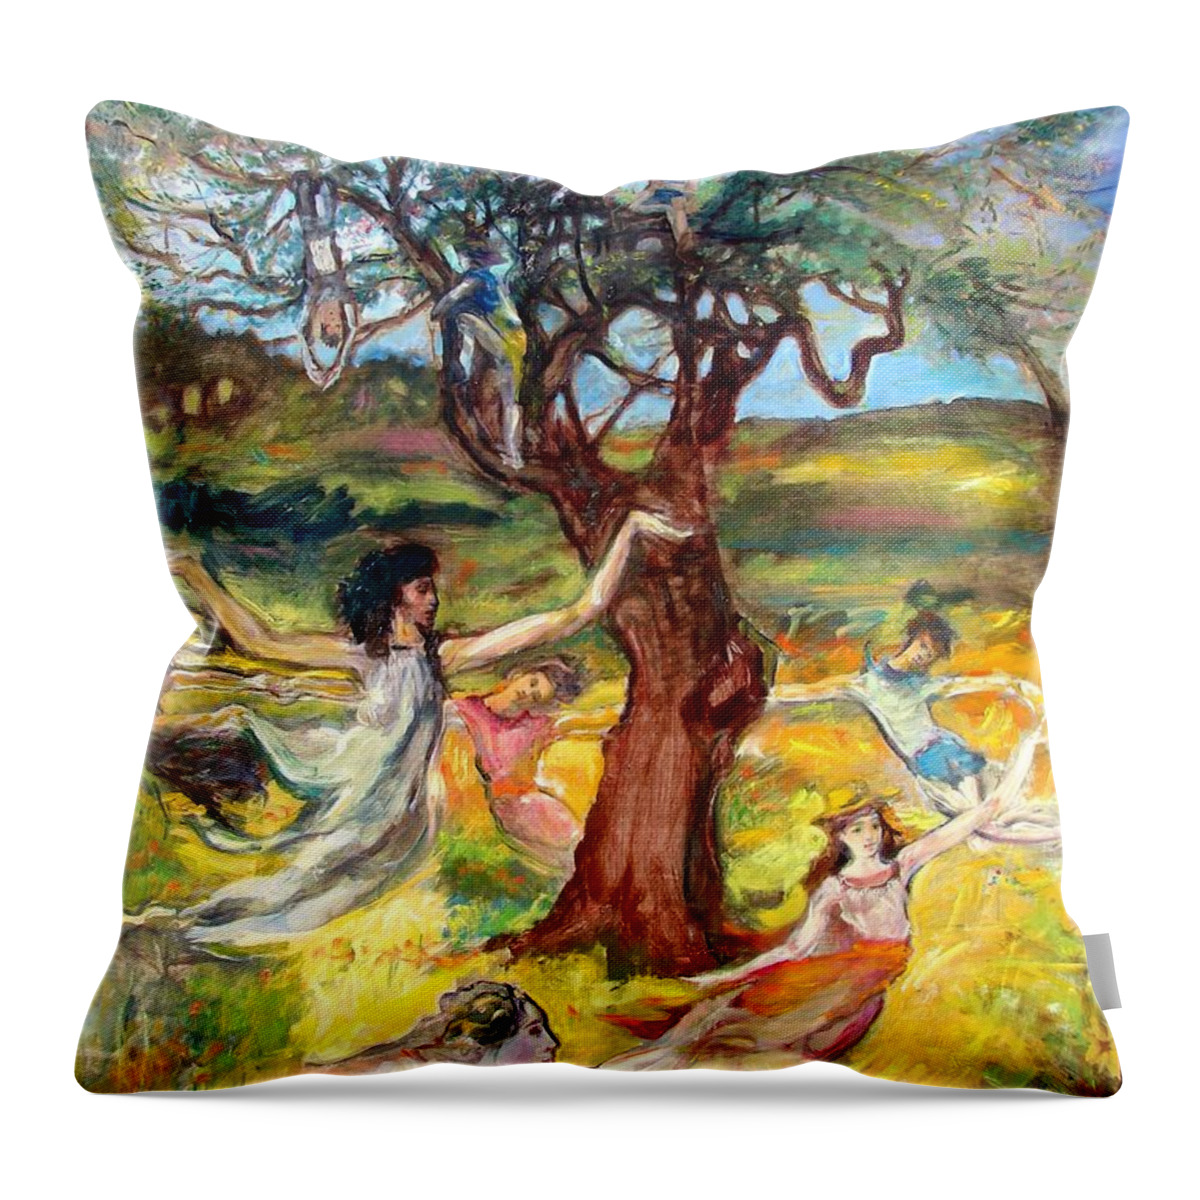 Allegorical Fantasy Throw Pillow featuring the painting the Cinnamon Tree by Scott Cumming